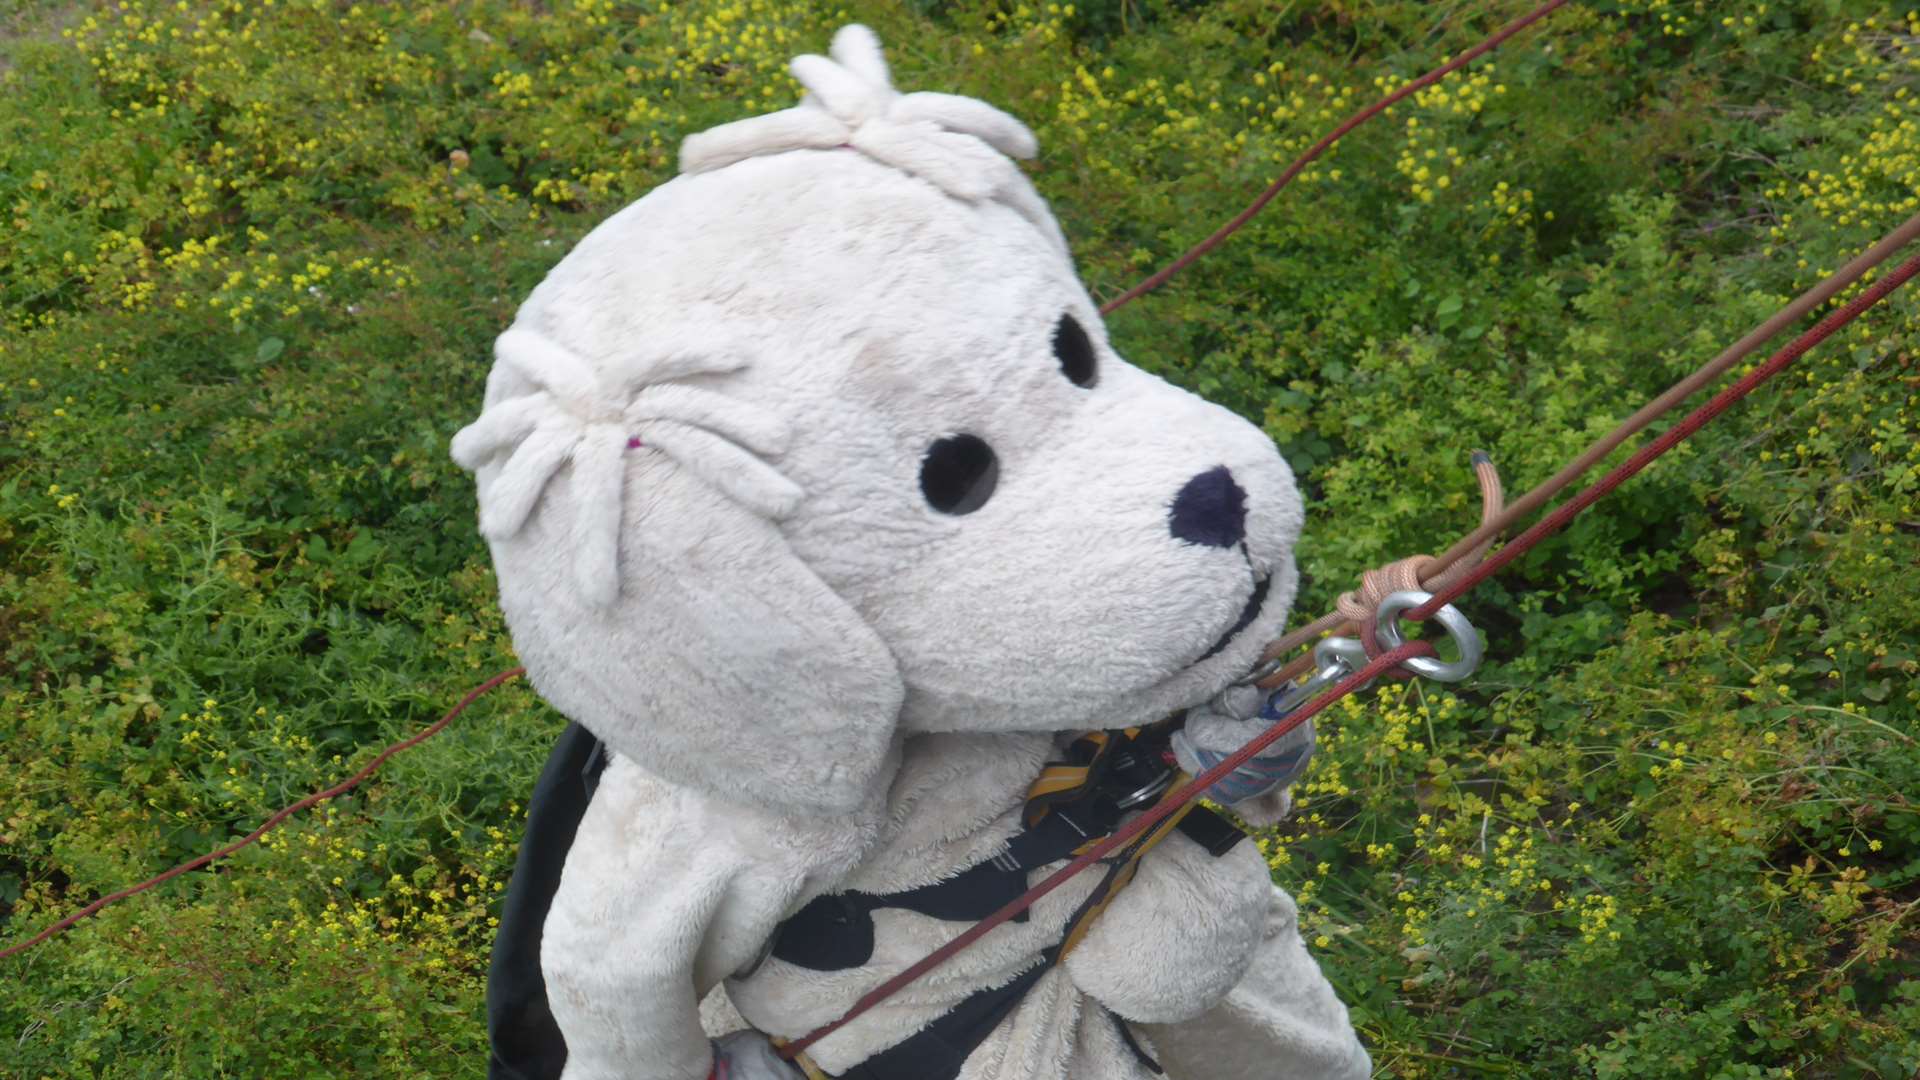 KM abseil challenges are a great way for charities to raise funds.